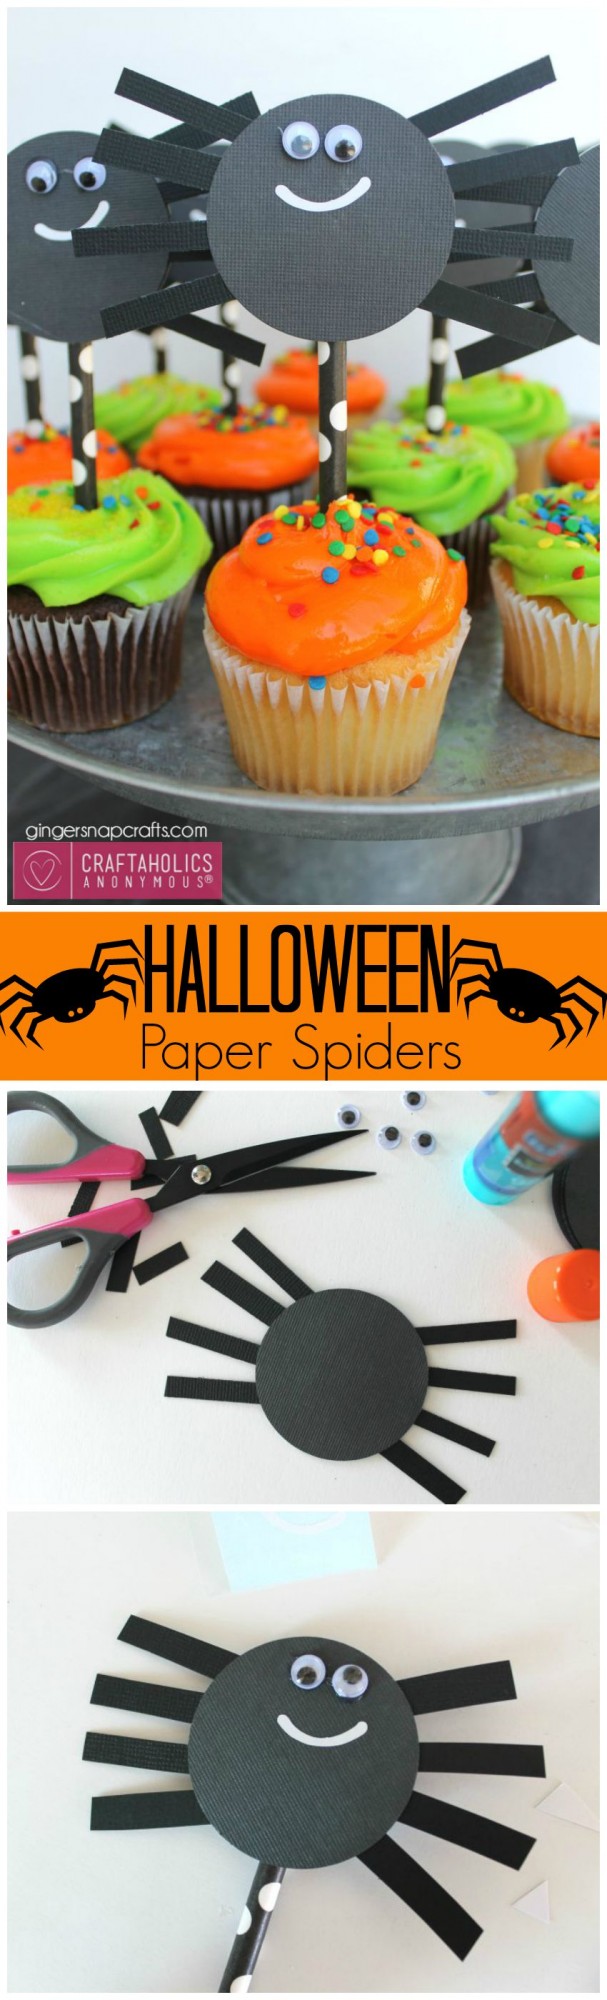 Halloween Paper Spiders Craft || Could put on cupcakes, hang from ceiling with fishline, or glue to twine for a garland. Or have pieces all cut out and let kids assemble for a great Kids Halloween Craft idea.